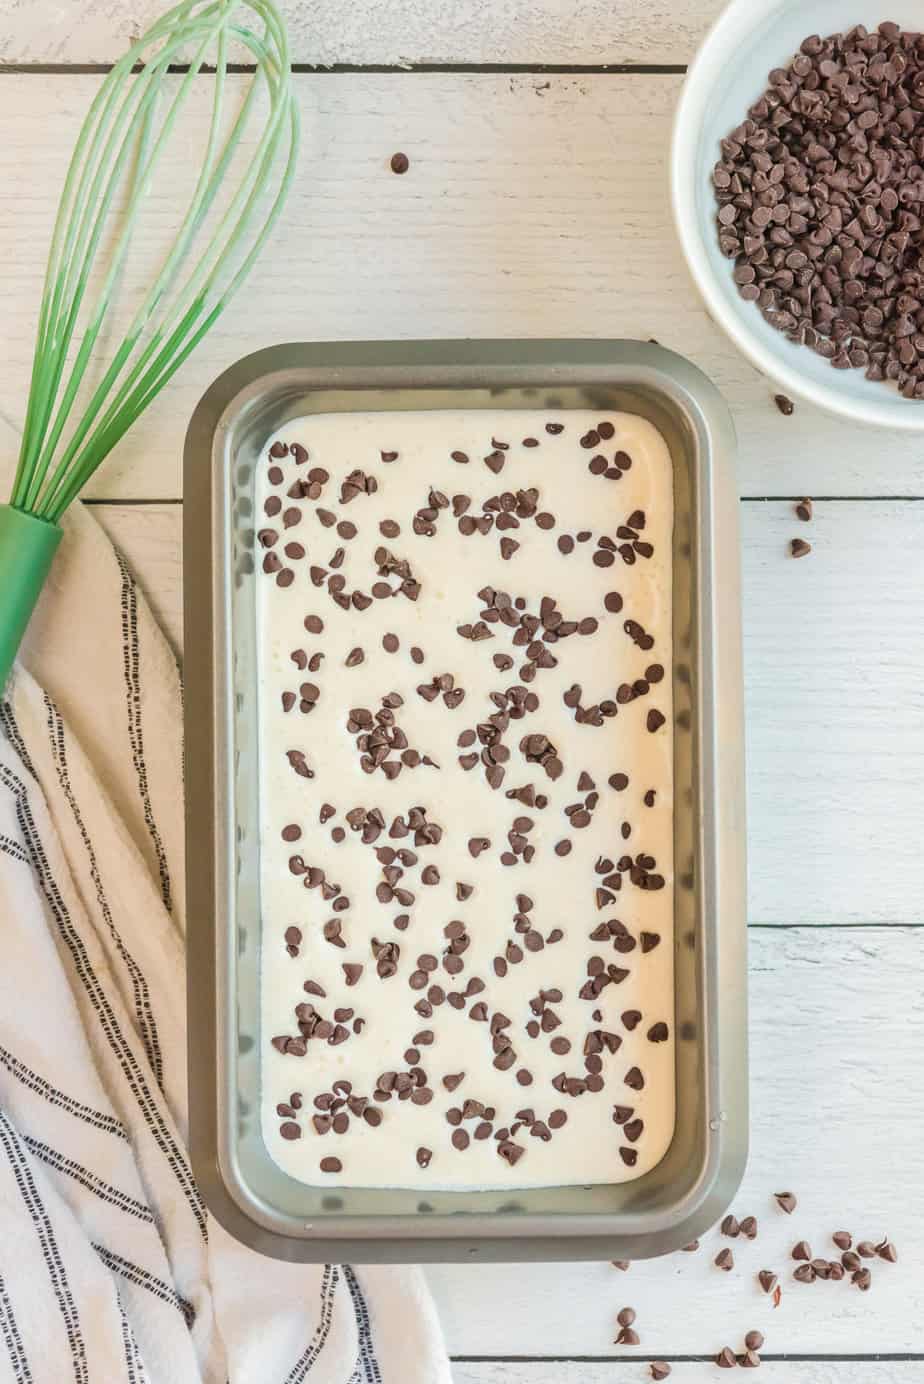 Chocolate chip ice cream in a loaf pan with more chocolate chips sprinkled on top from a bowl nearby.